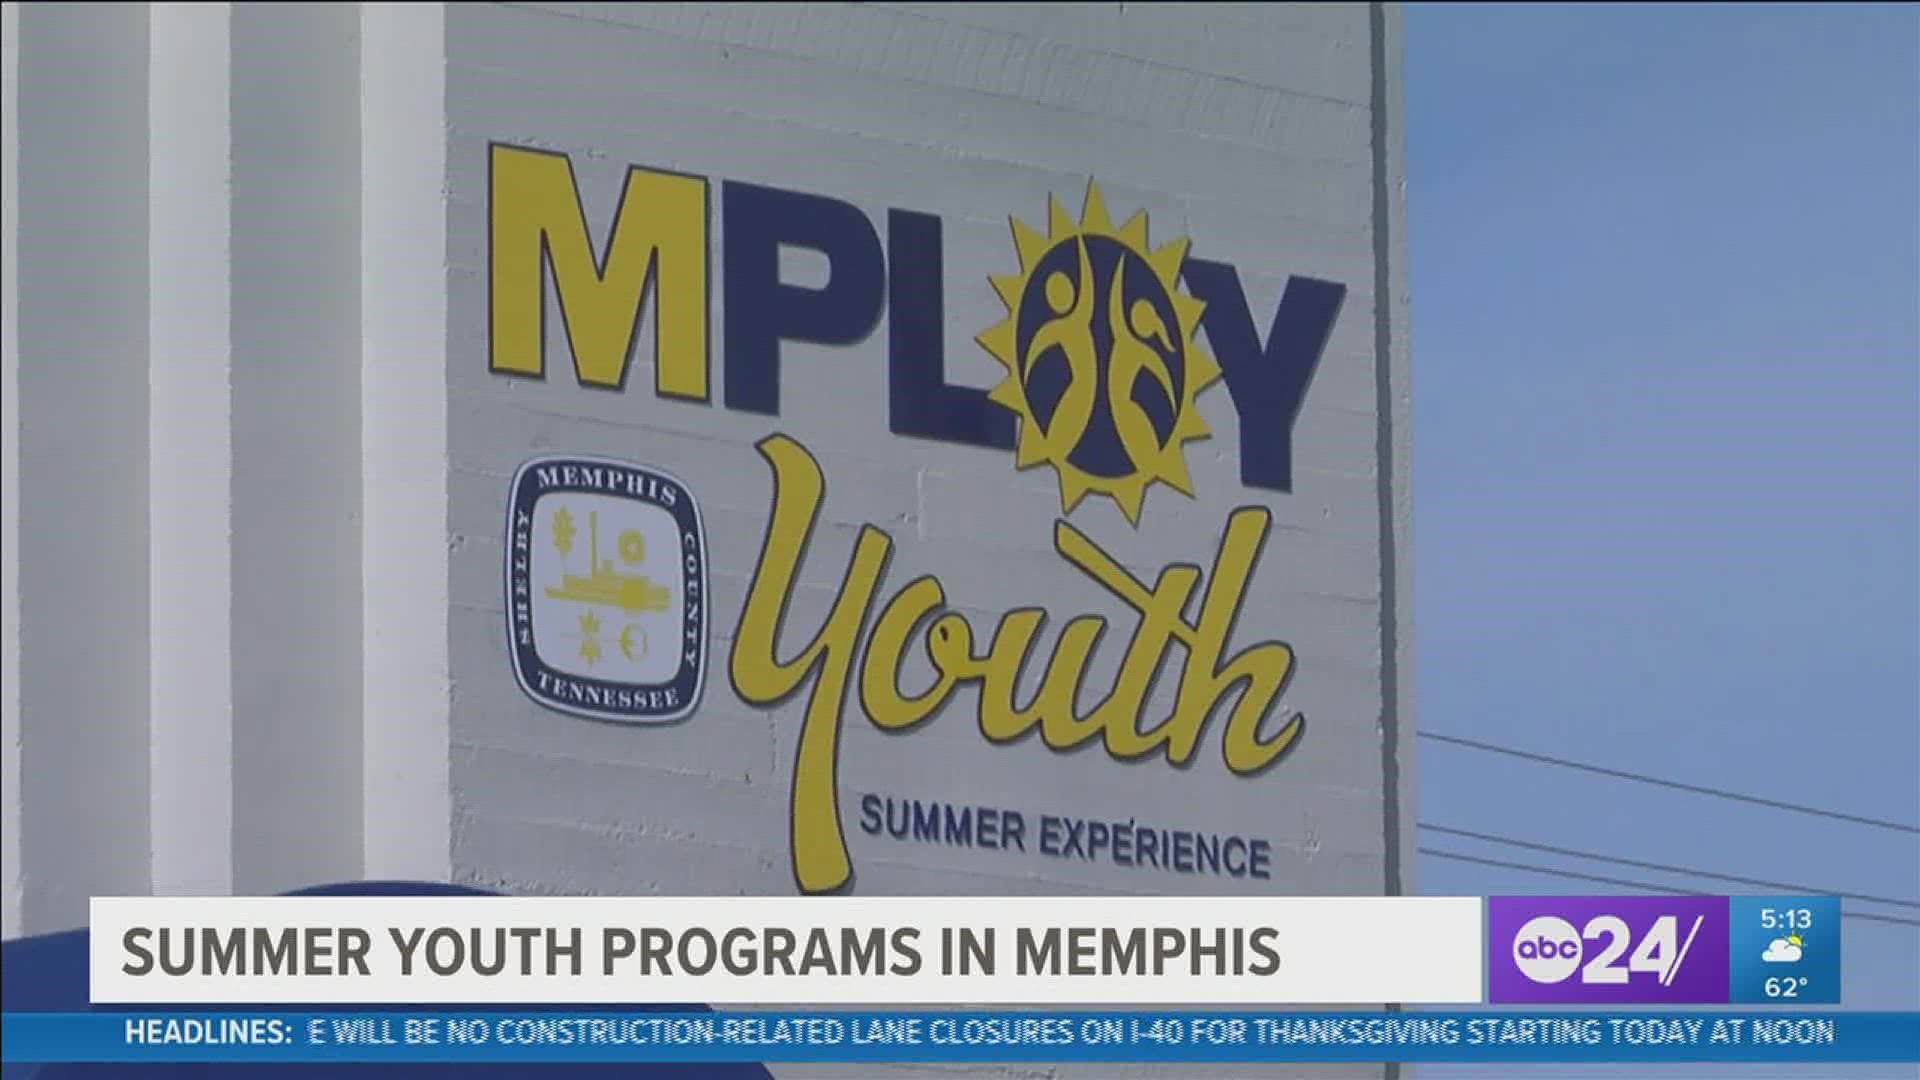 The MPLOY Experience is part of a city initiative that provides 14 to 22-year-olds a chance to spend the summer focusing on possible career path options.